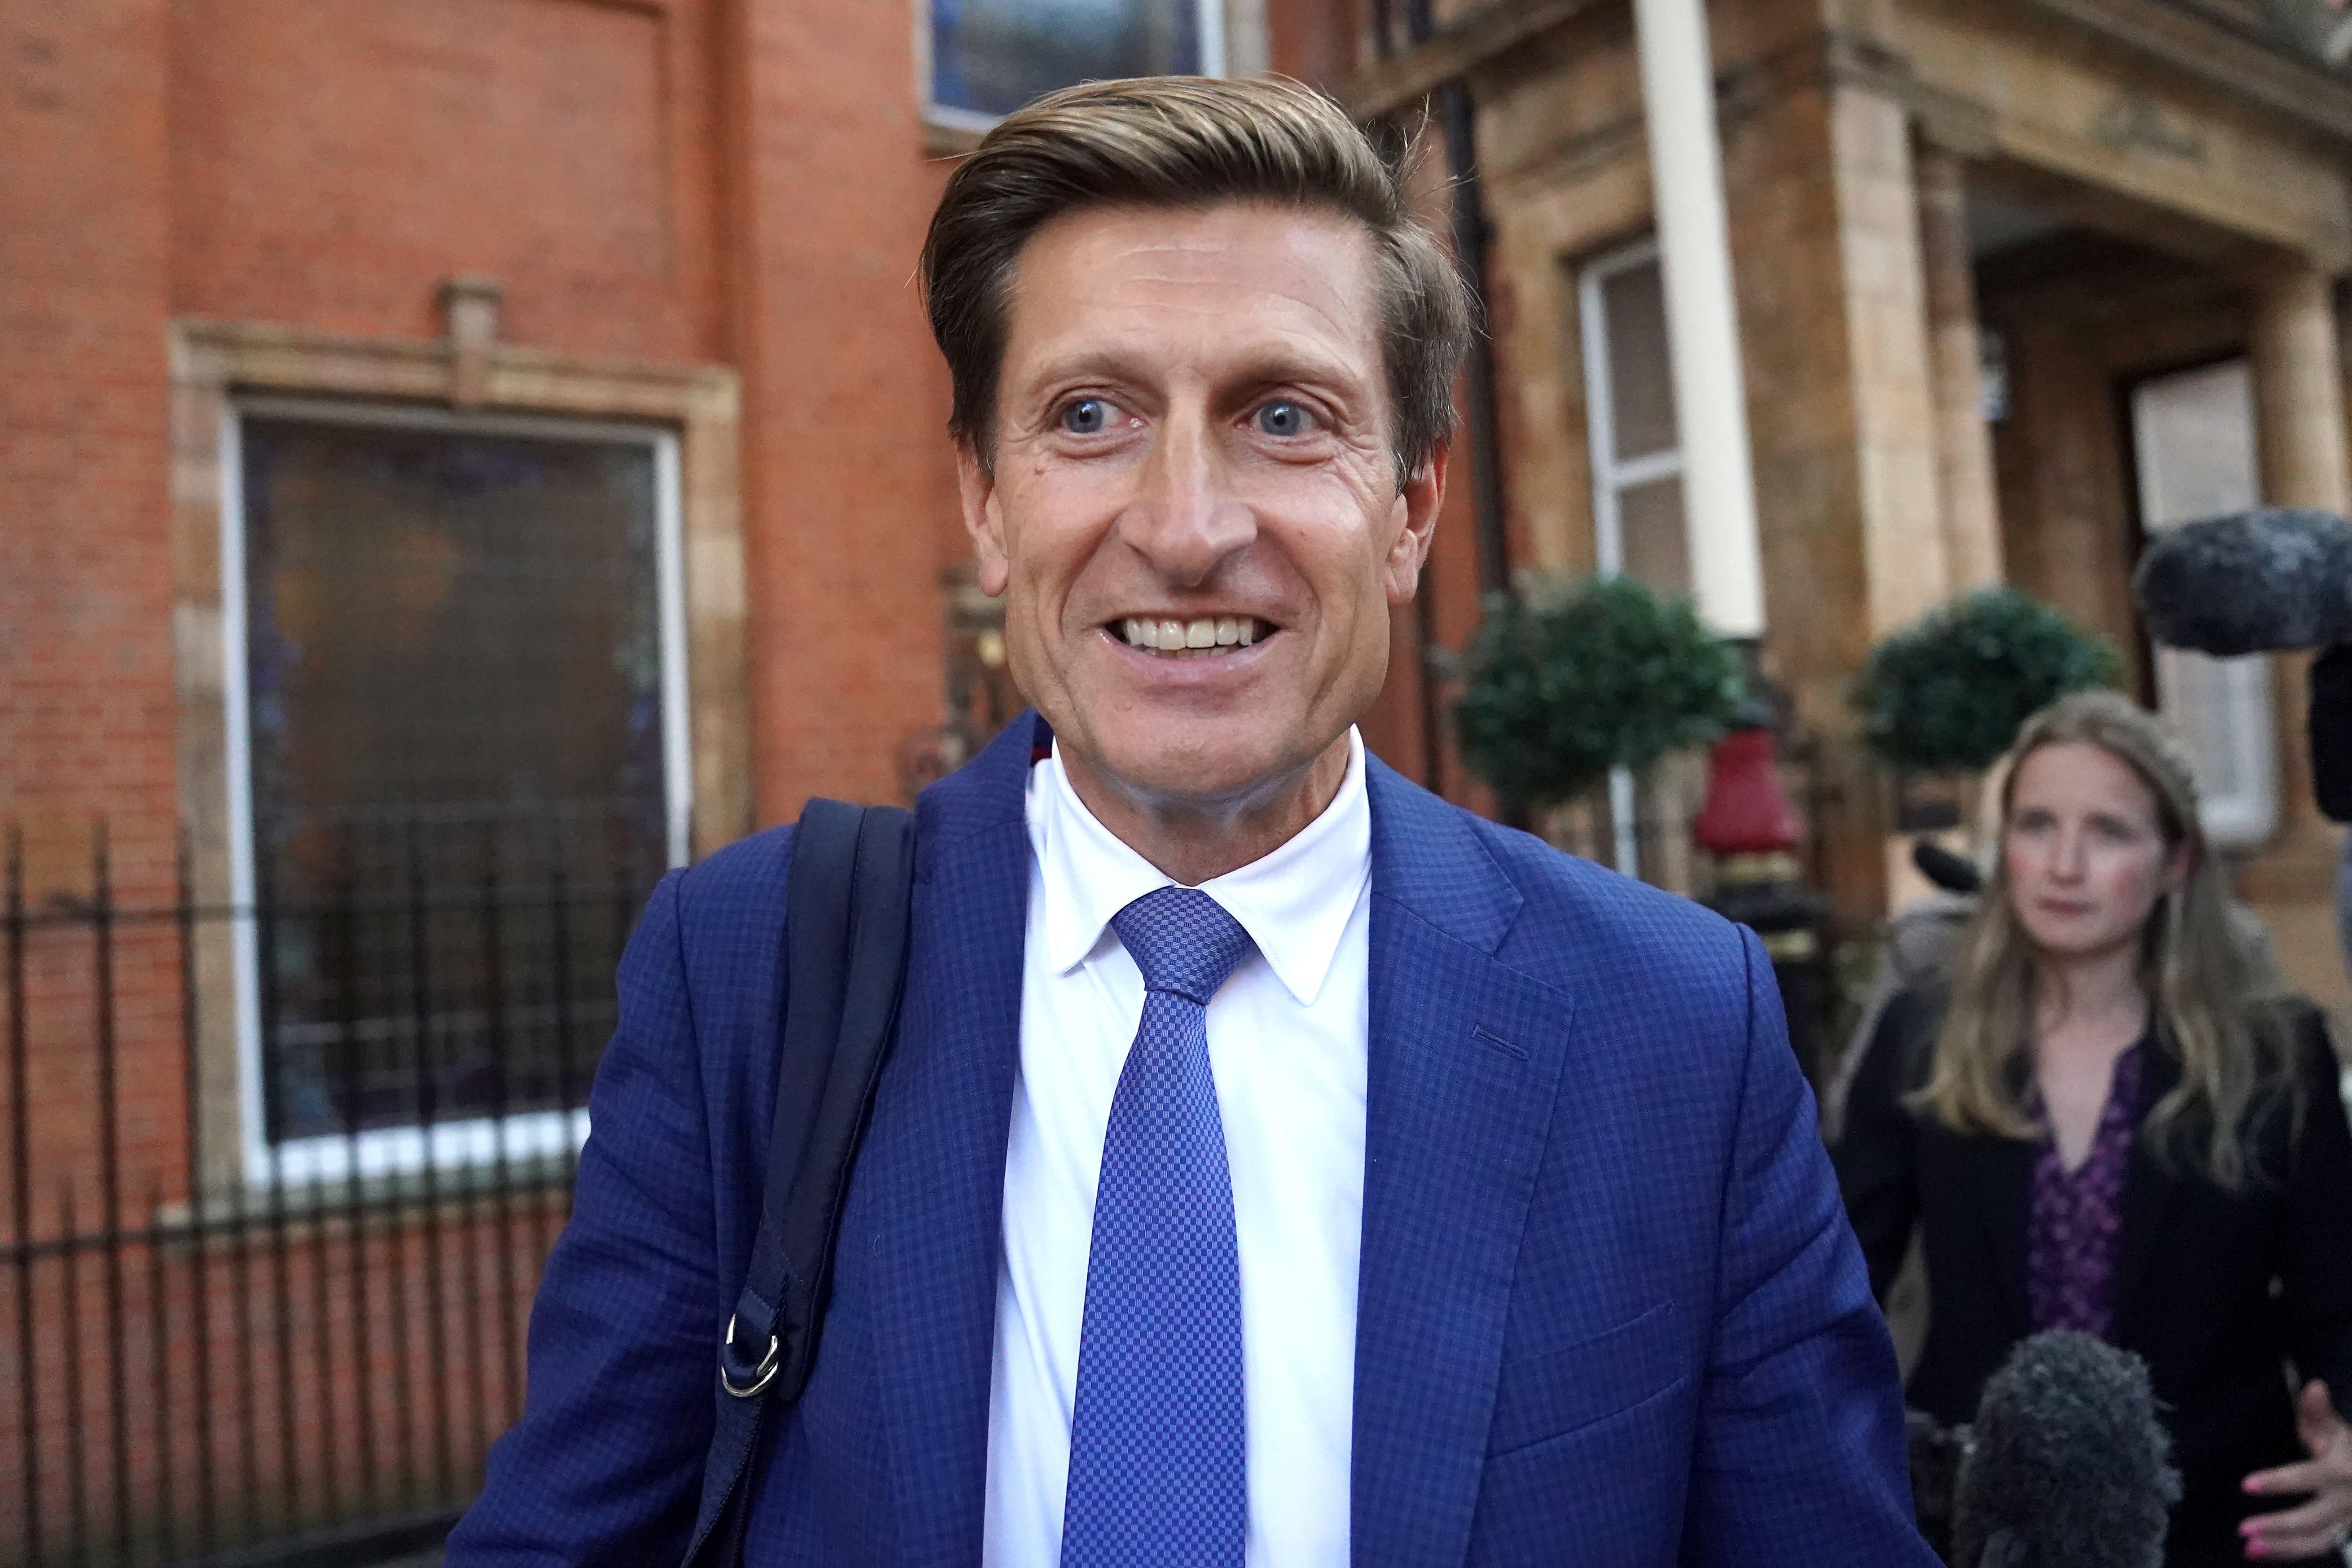 Crystal Palace chairman Steve Parish says Premier League clubs are looking at the possibility of a cap on wage bills to keep the top flight competitive (Victoria Jones/PA)